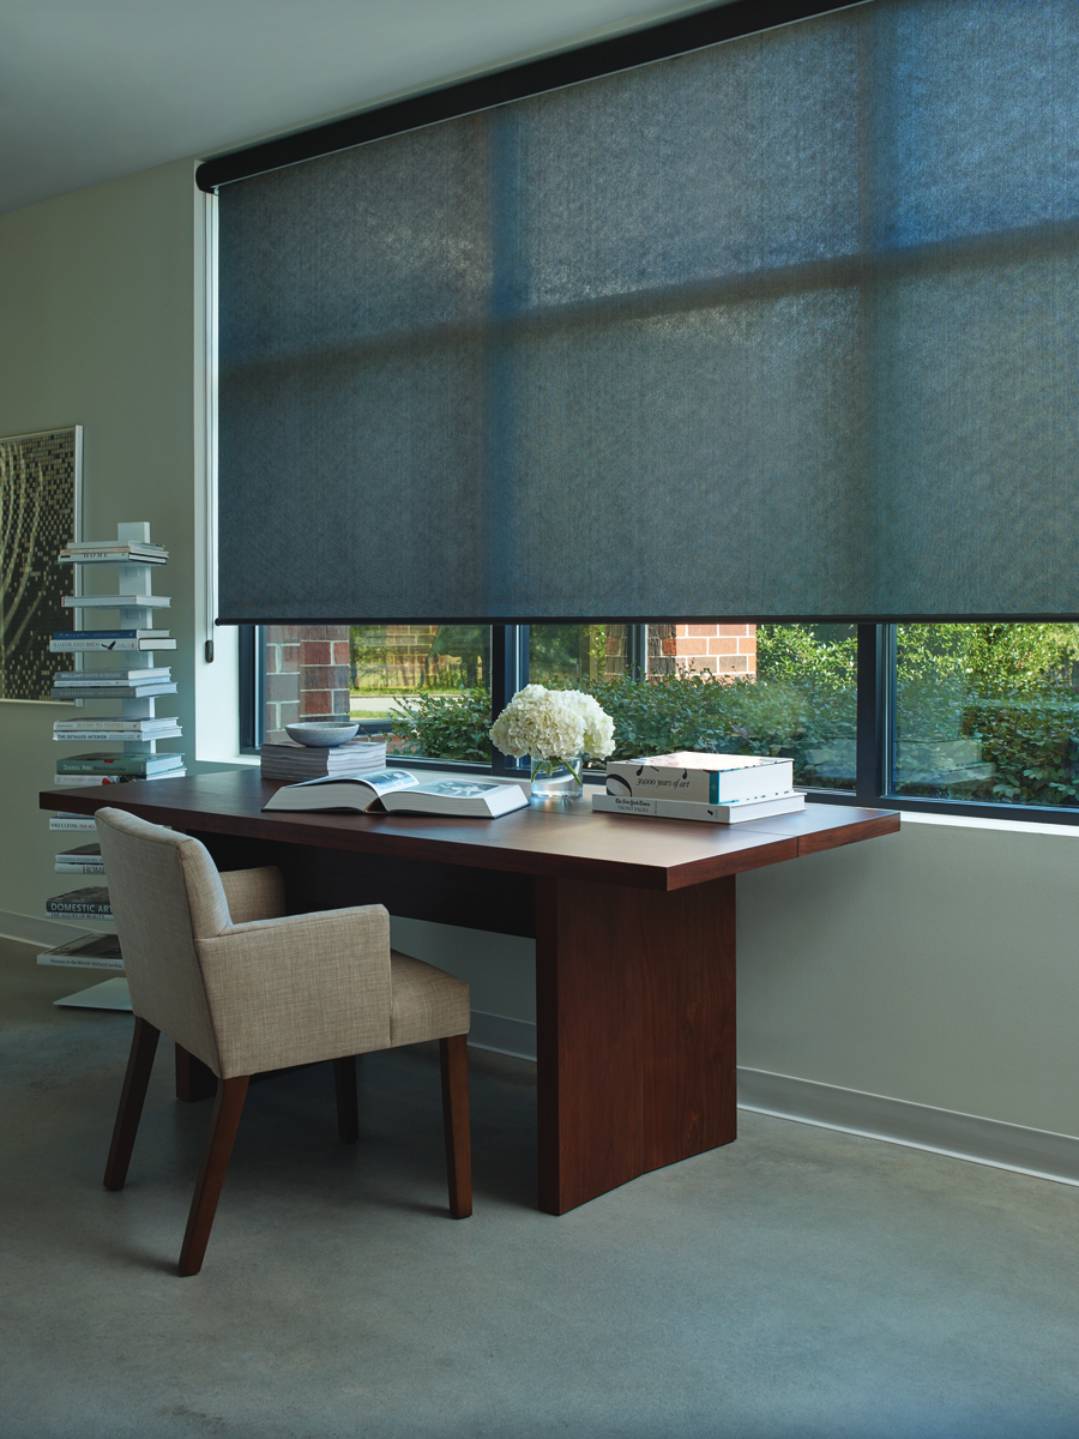 Modern Vertical Blinds, Fabric Blinds, Automated Blinds for Your Patio near Black Hills, South Dakota (SD)